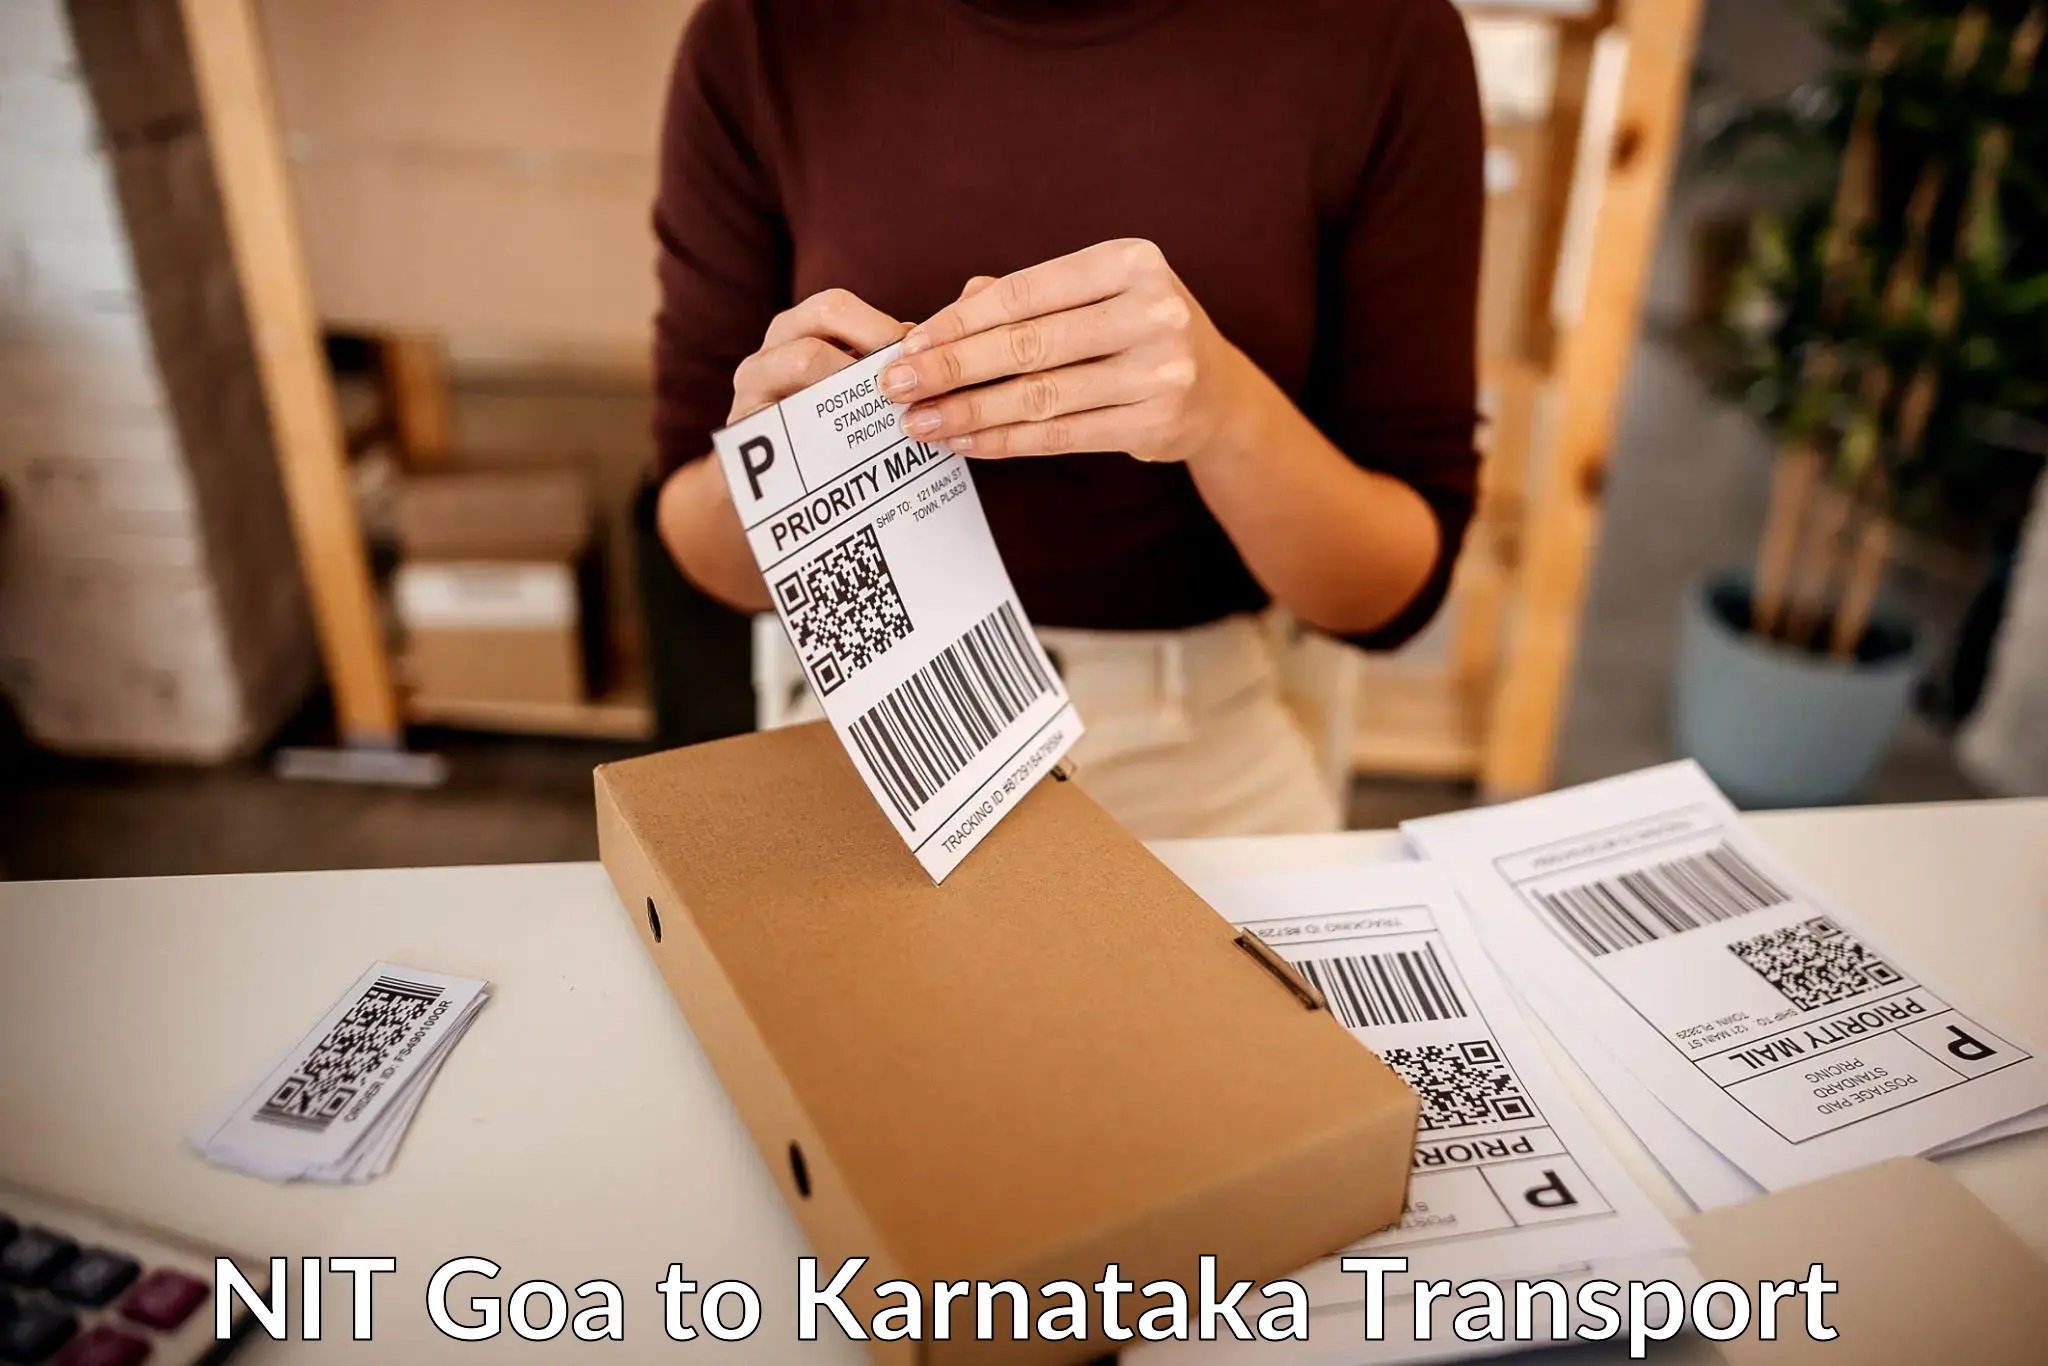 Two wheeler parcel service NIT Goa to Chikkamagalur